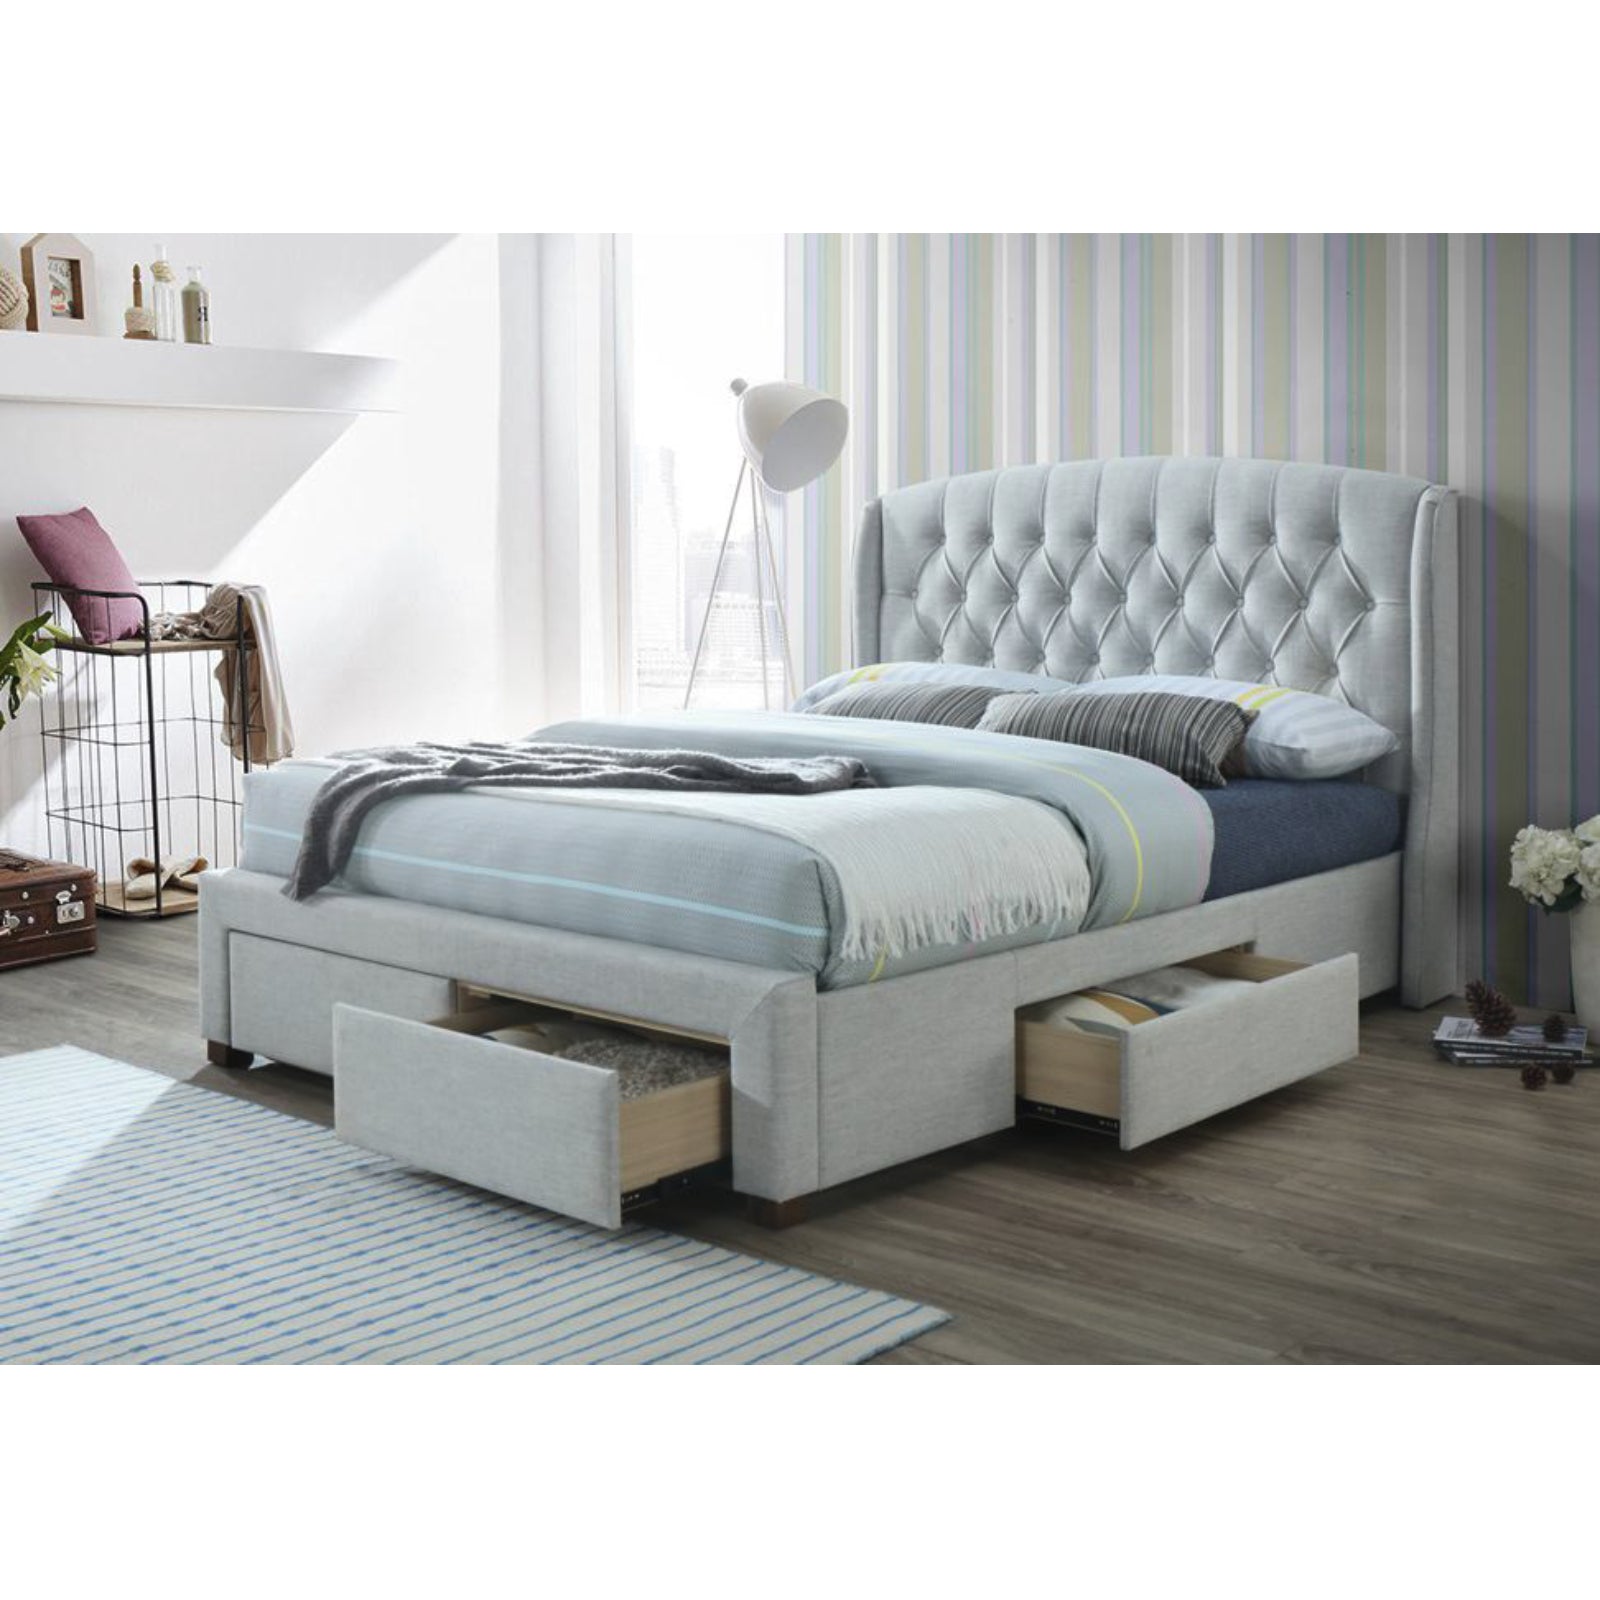 Honeydew King Size Bed Frame Timber Mattress Base With Storage Drawers - Beige - SILBERSHELL